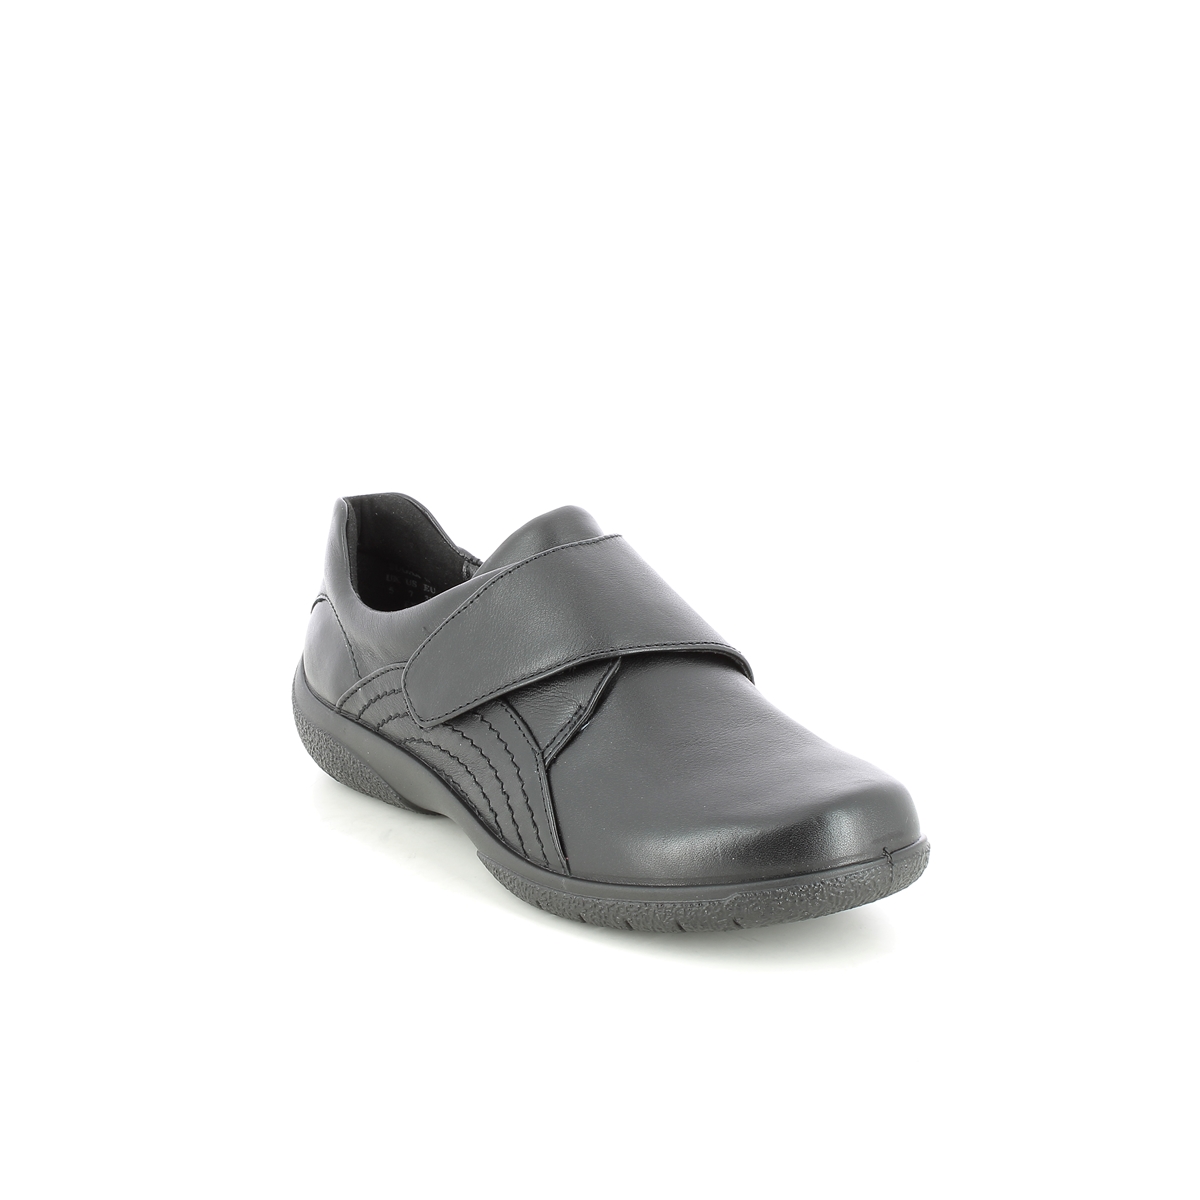 Hotter Sugar 2 Wide Black leather Womens Comfort Slip On Shoes 12011-30 in a Plain Leather in Size 4